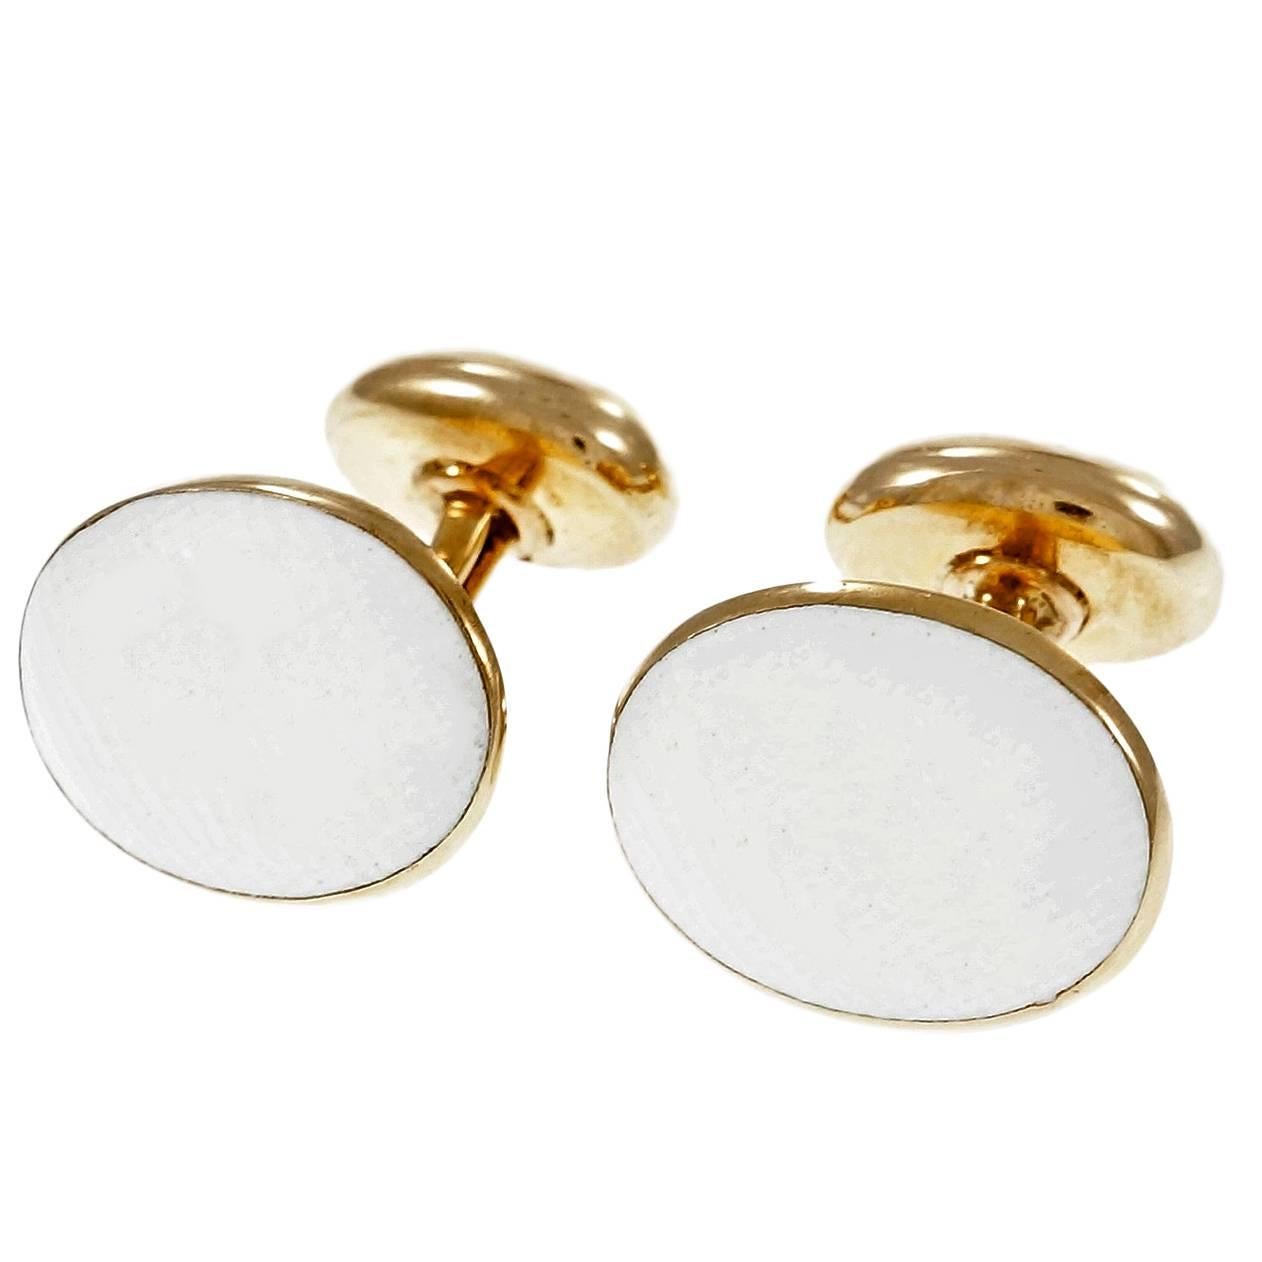  Larter & Sons Textured White Tops Rose Gold Cufflinks For Sale